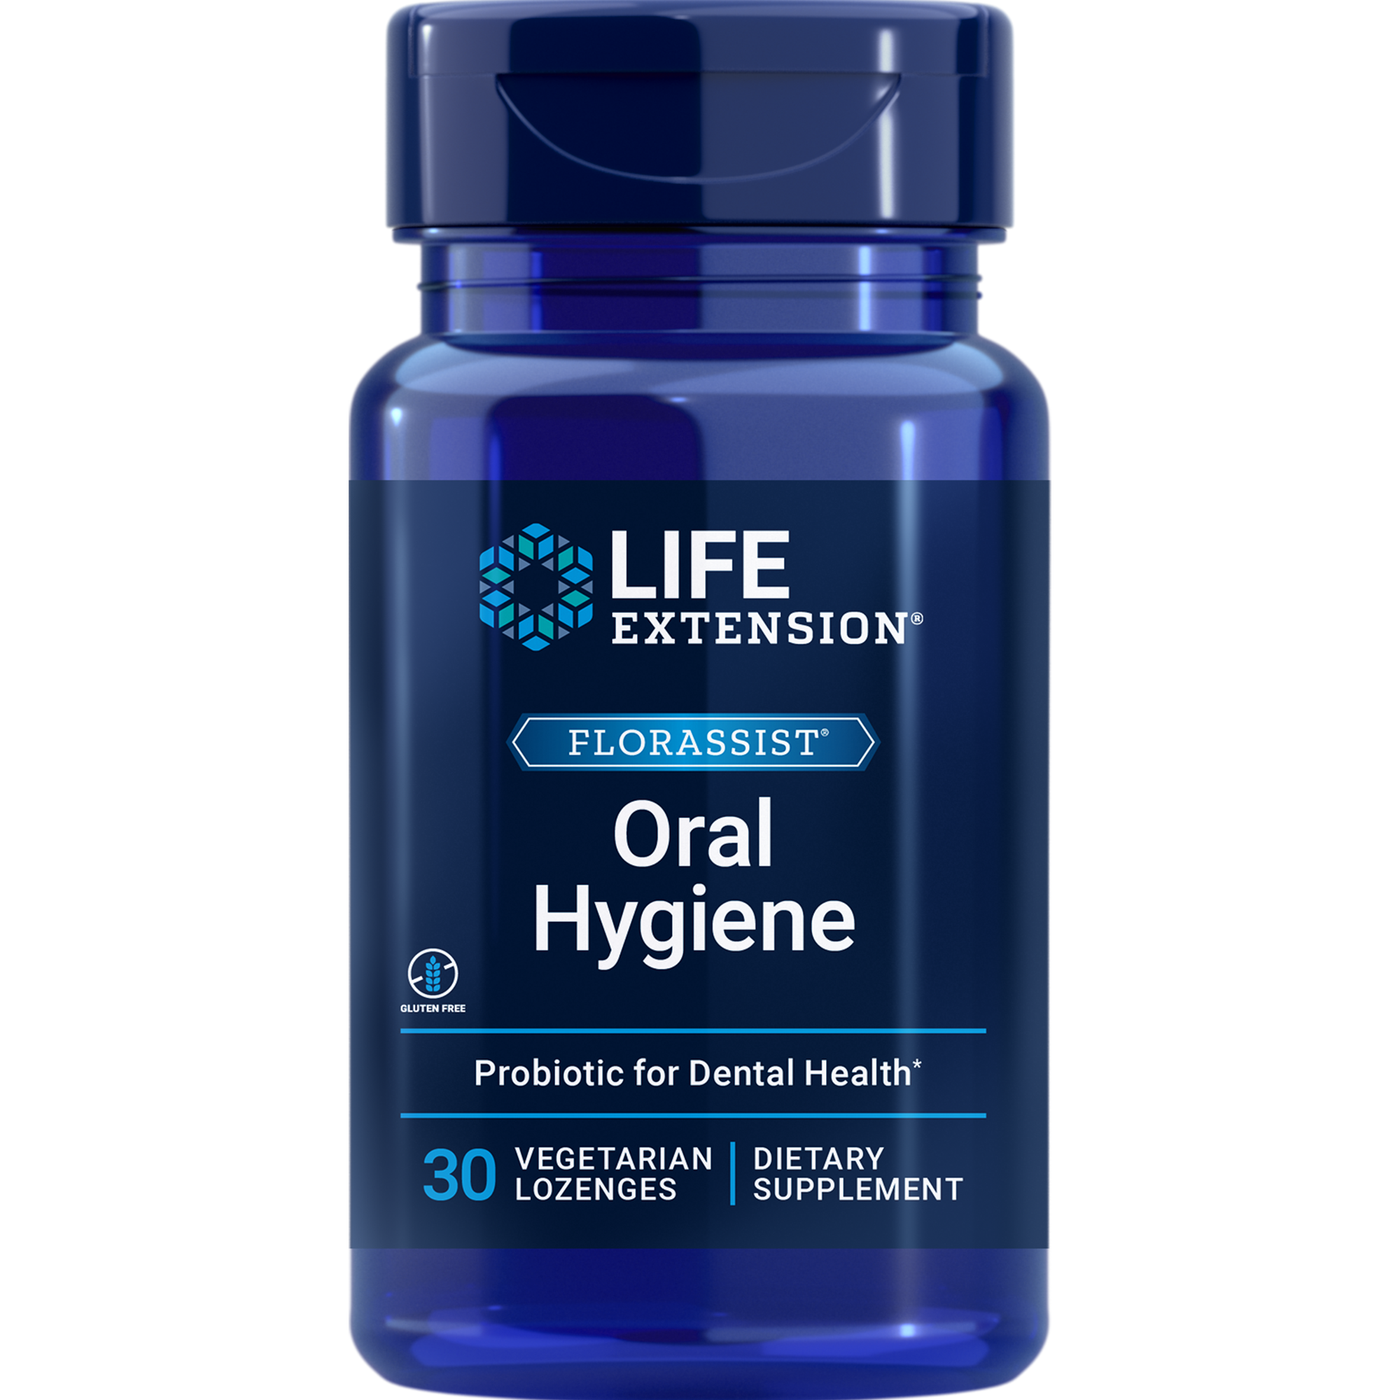 Florassist Oral Hygiene enges Curated Wellness